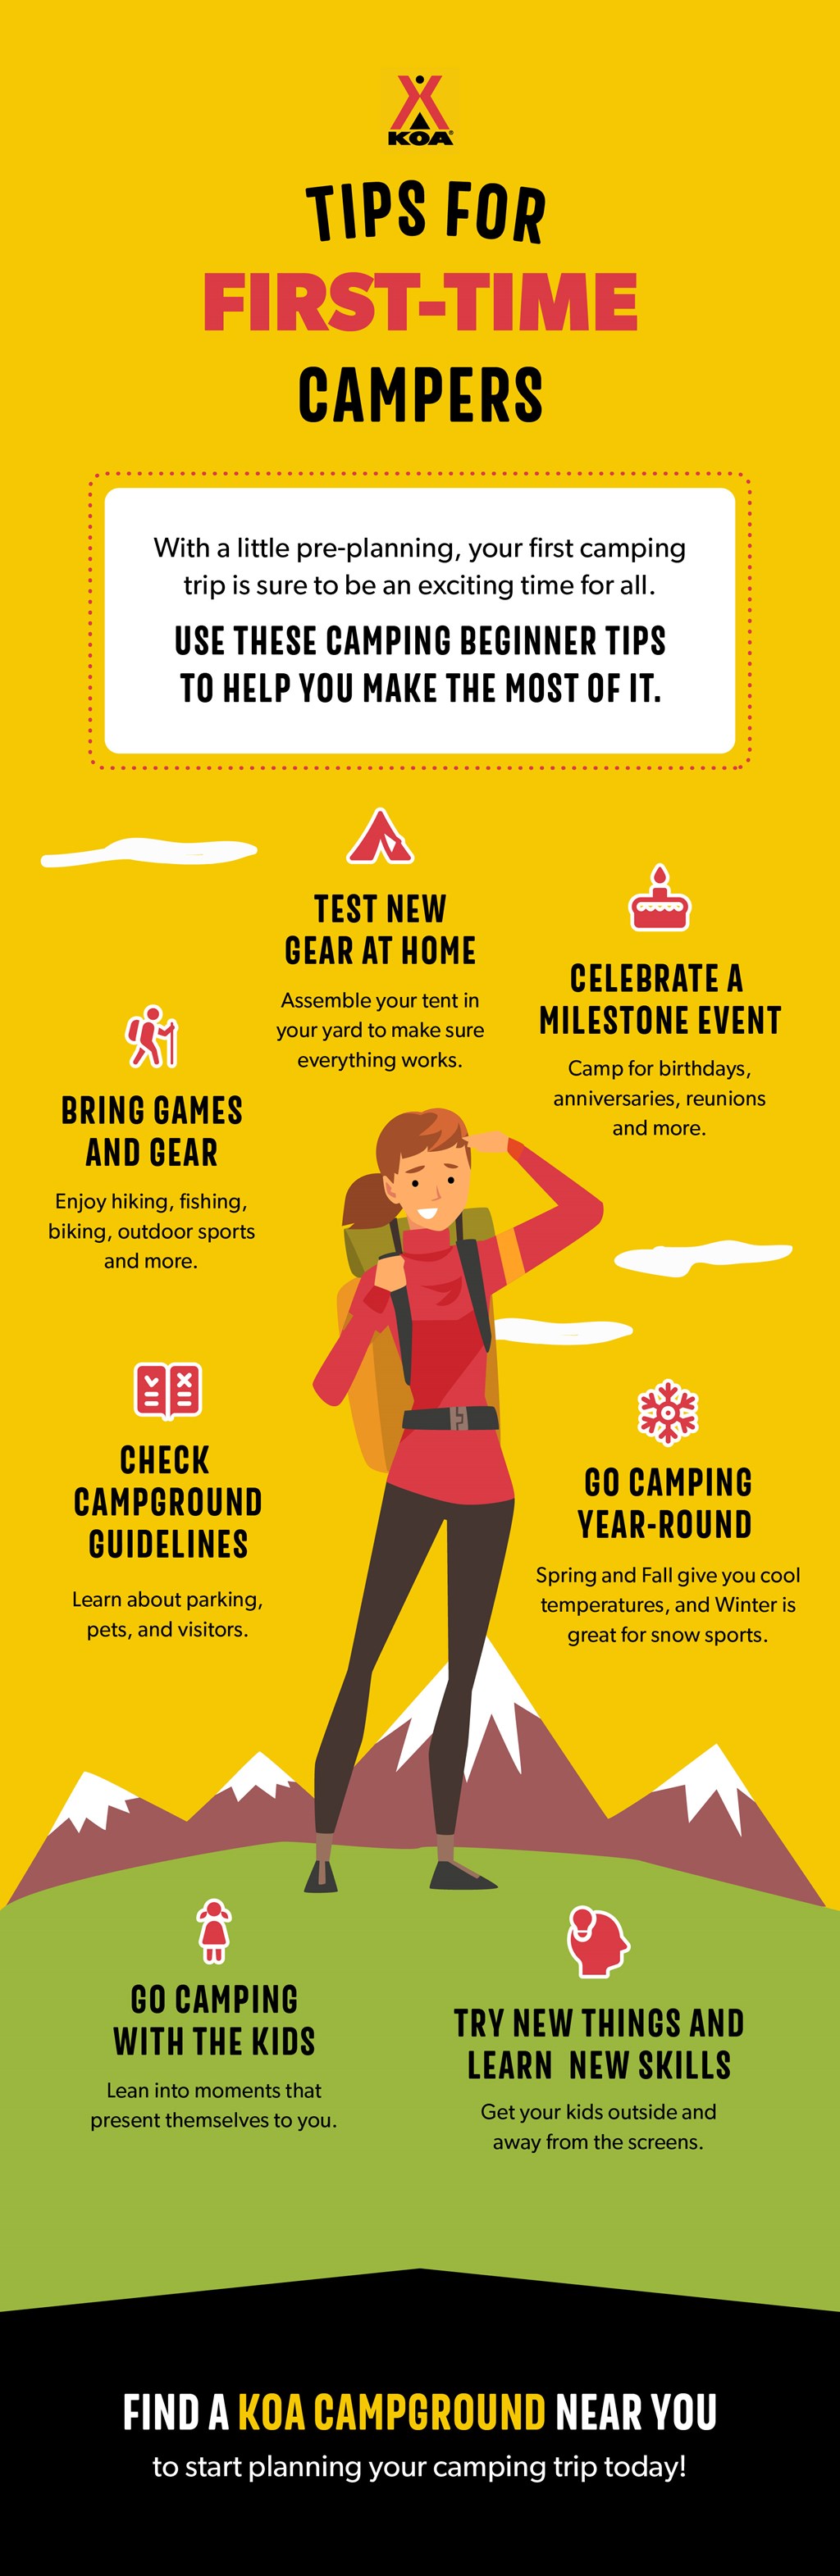 A micrographic outlining tips for first time campers. These include testing gear at home, checking campground guidelines, and trying camping during different times of year.